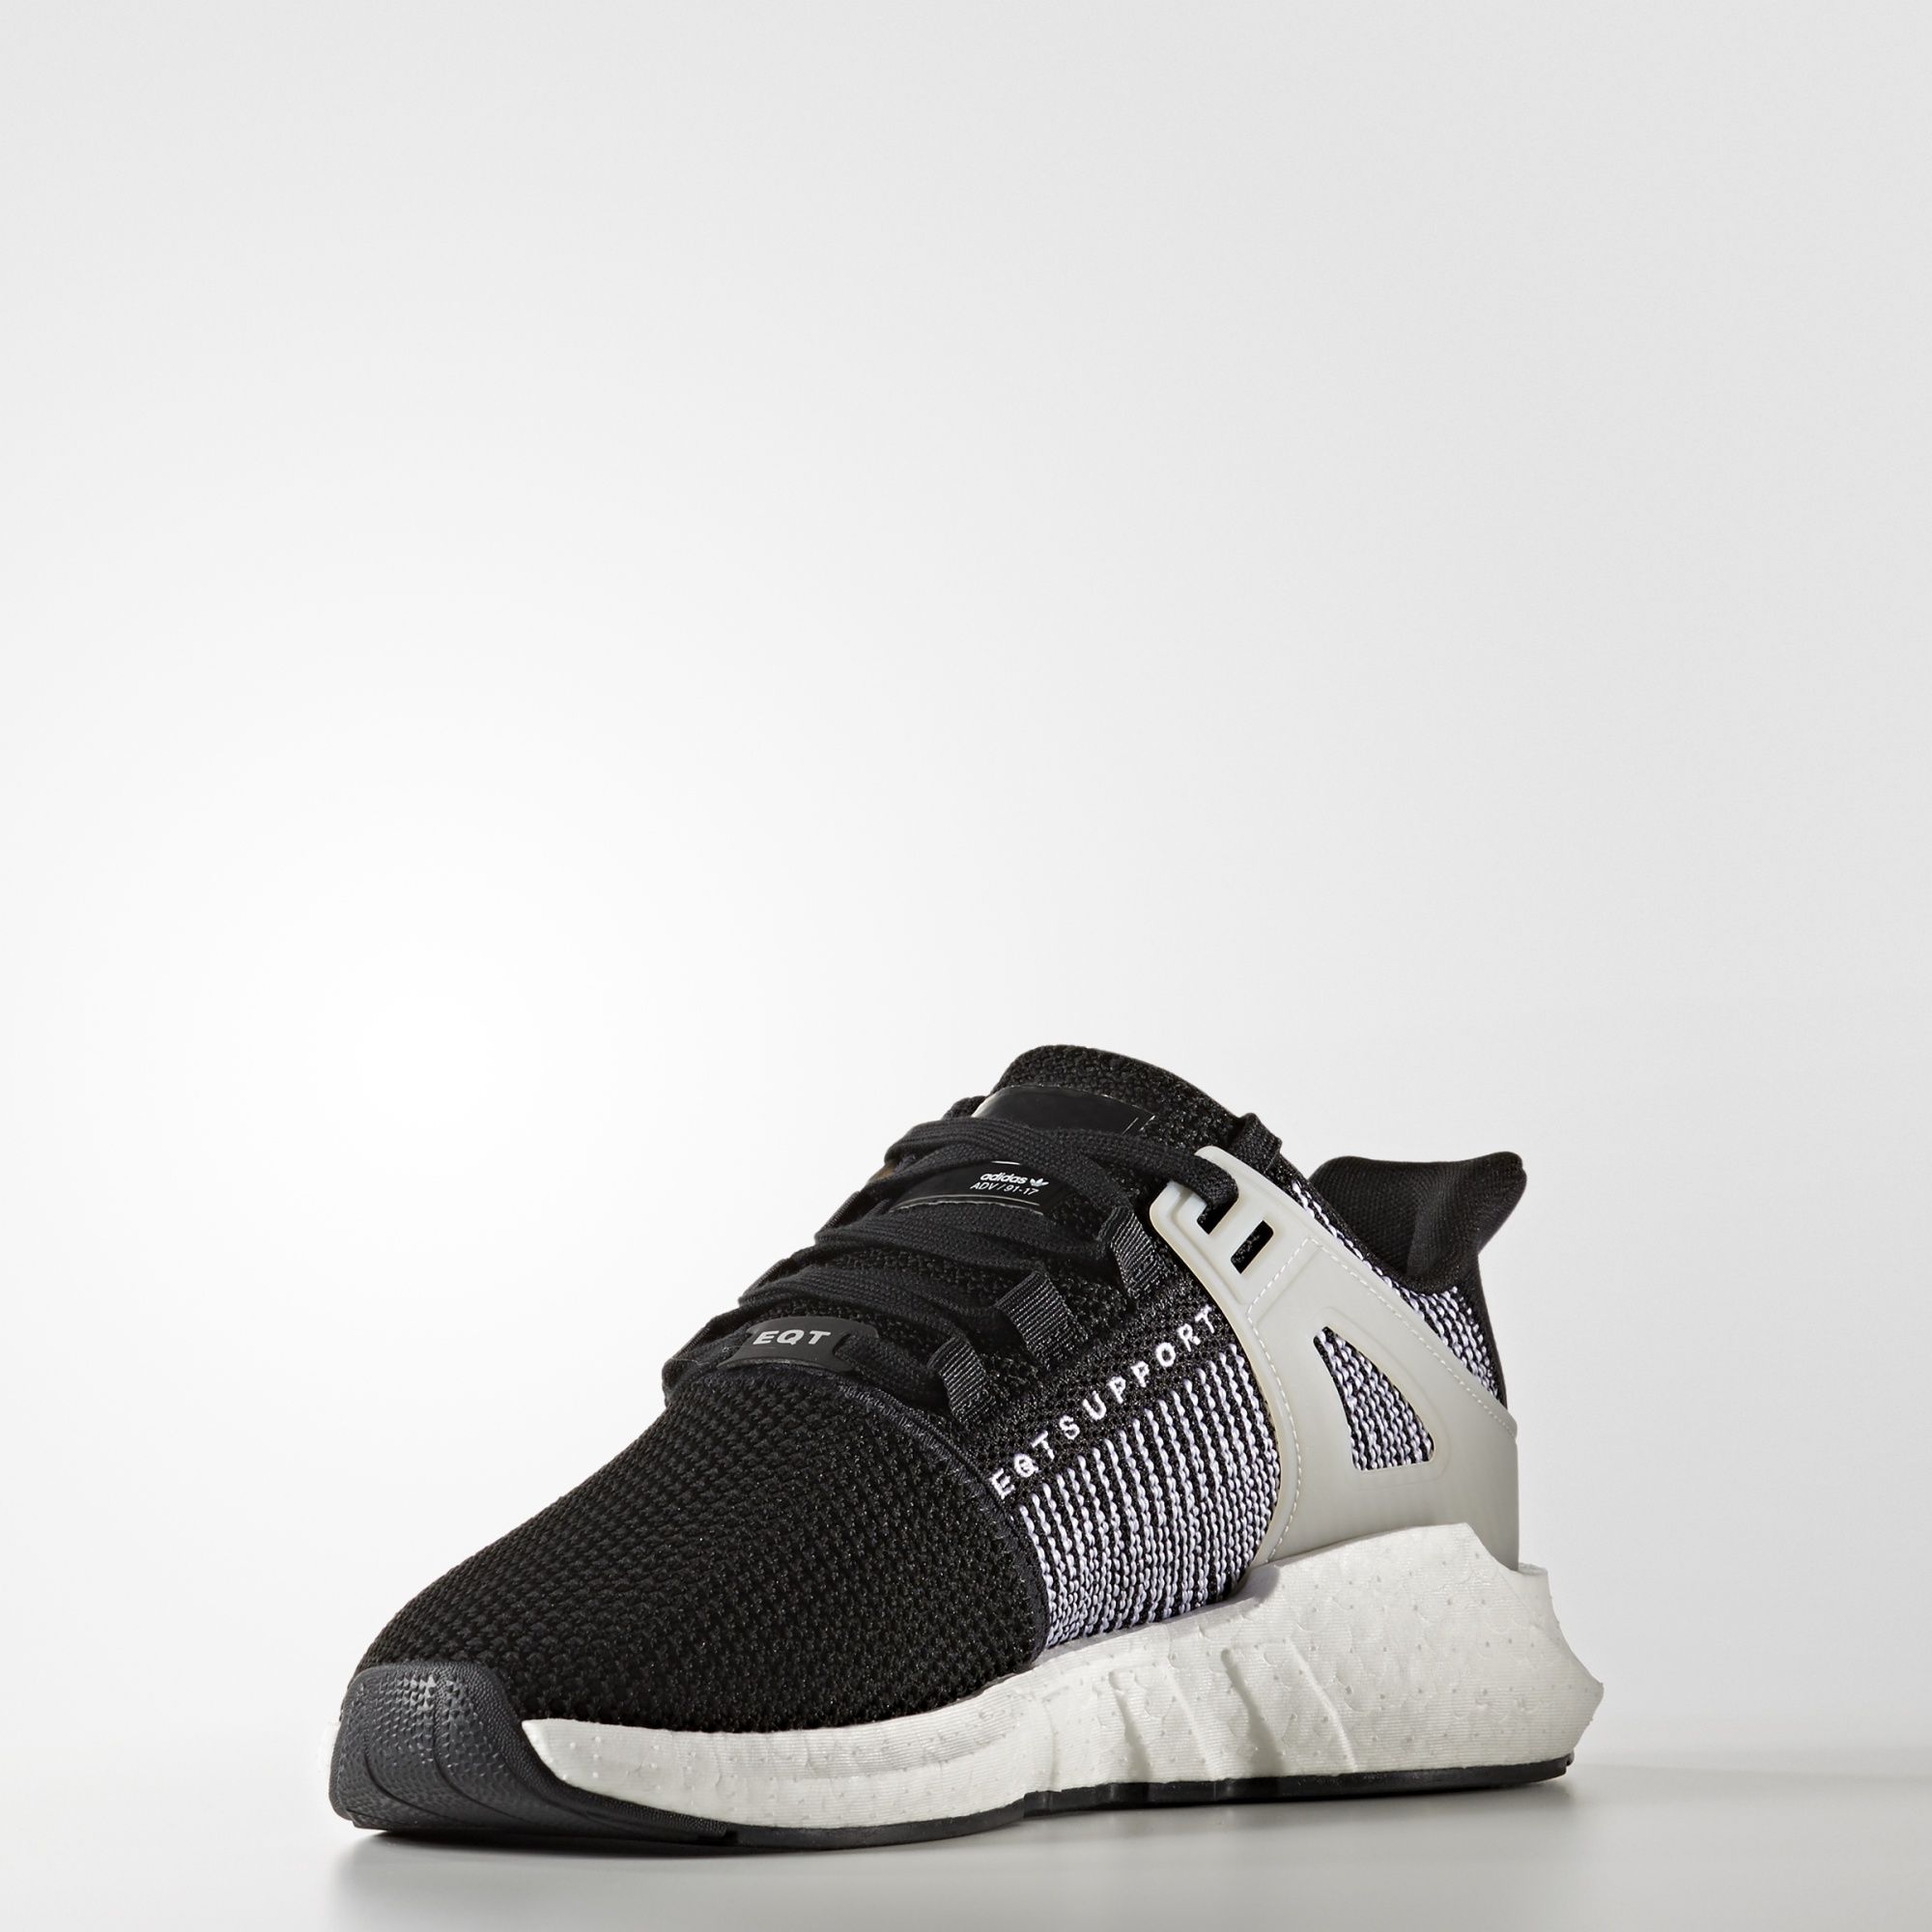 adidas-eqt-support-9317-textile-core-black-running-white-3